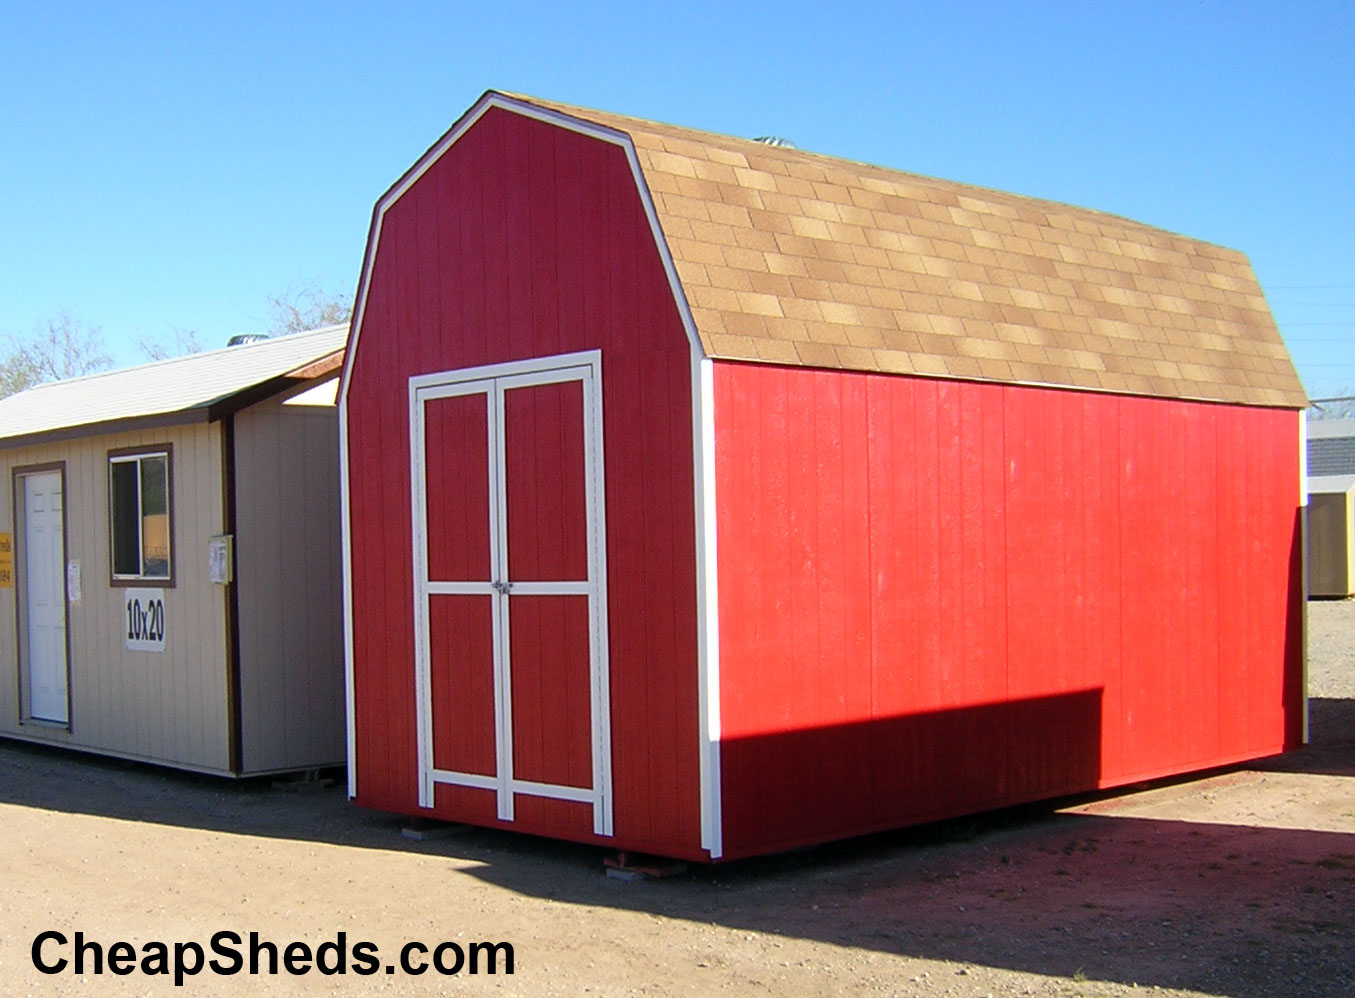 Compare All My Shed Plans Here